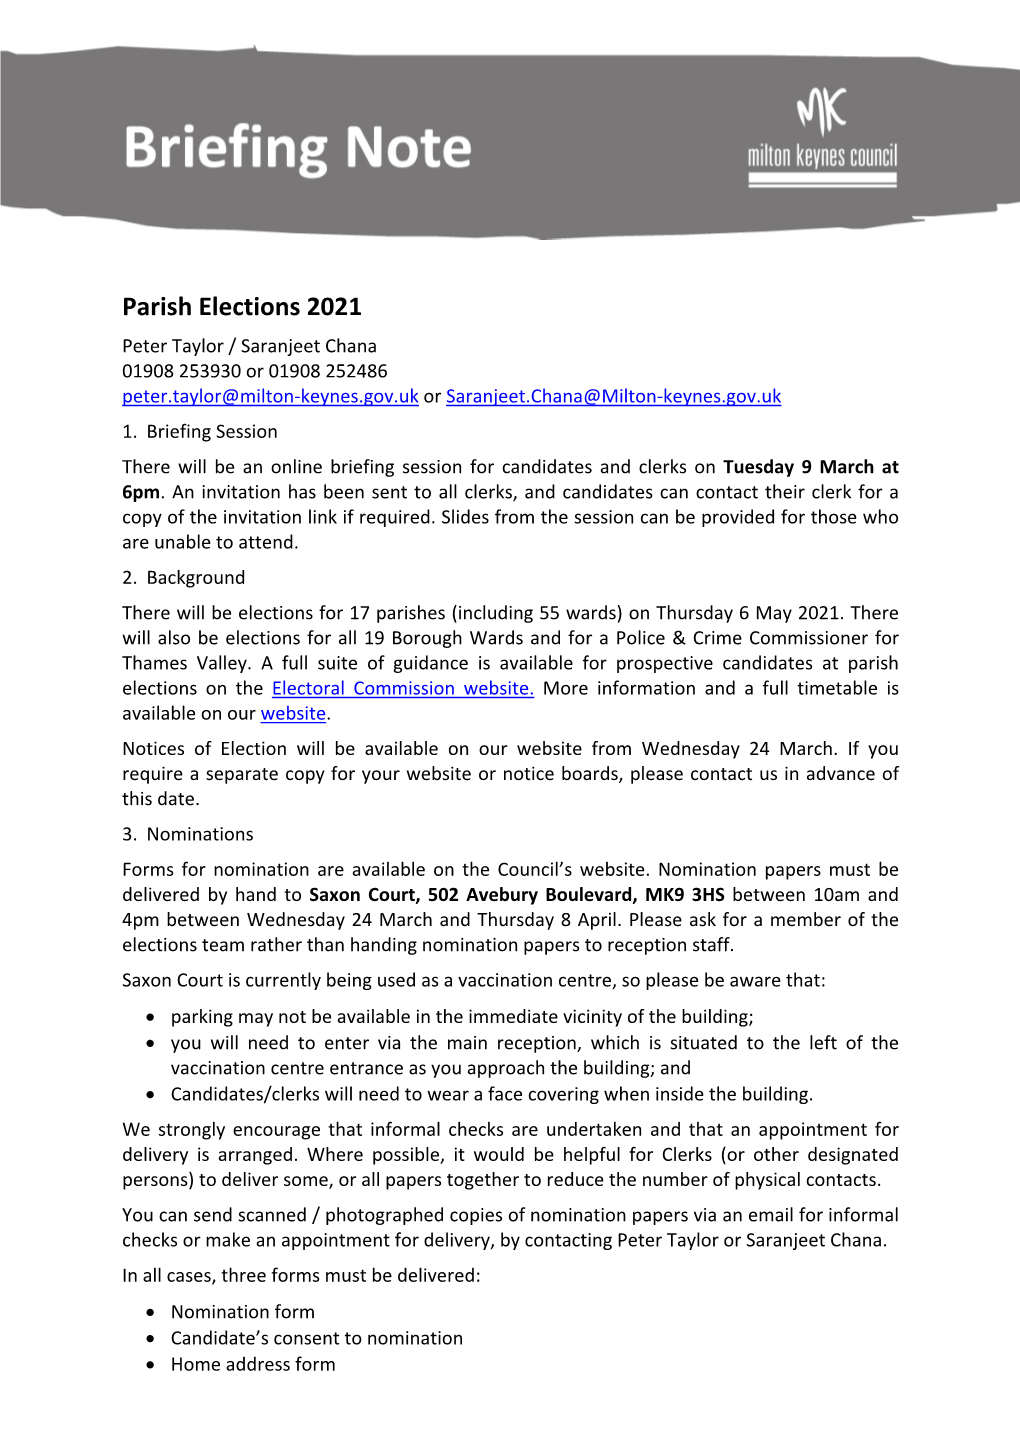 Briefing Note for Parish Elections 2021